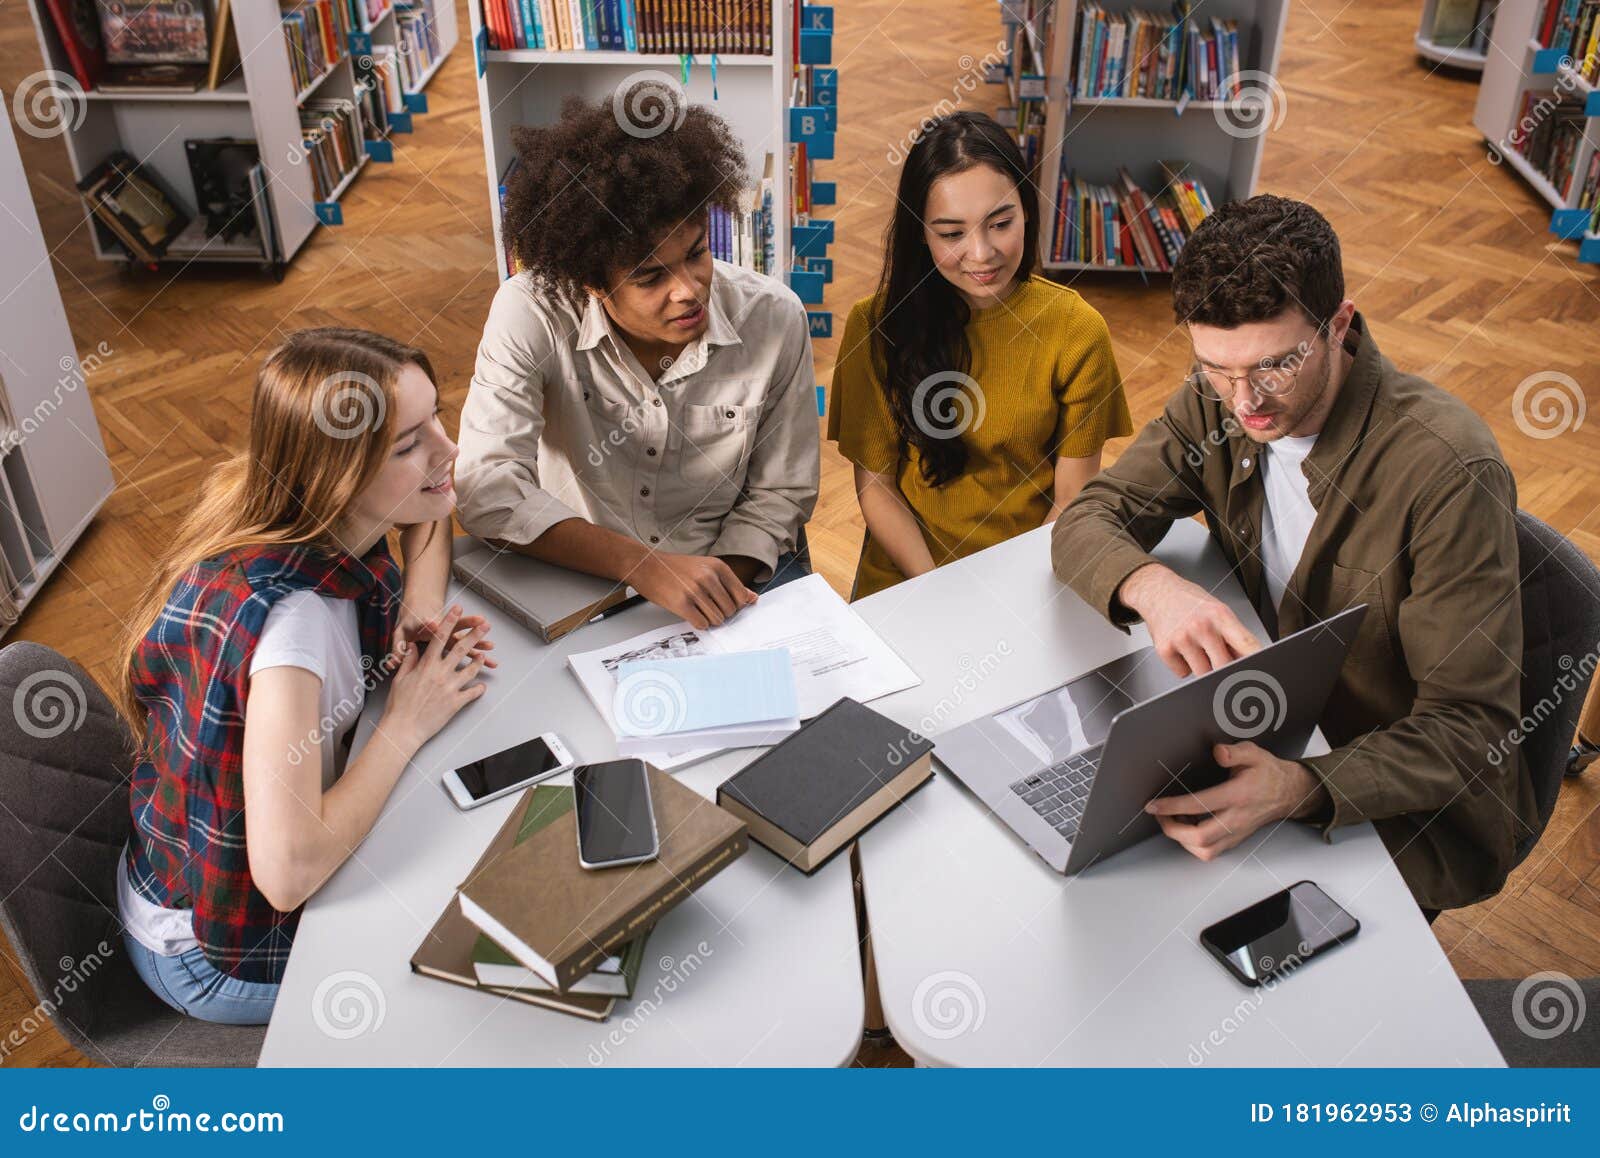 University Students Are Studying In A Library Together